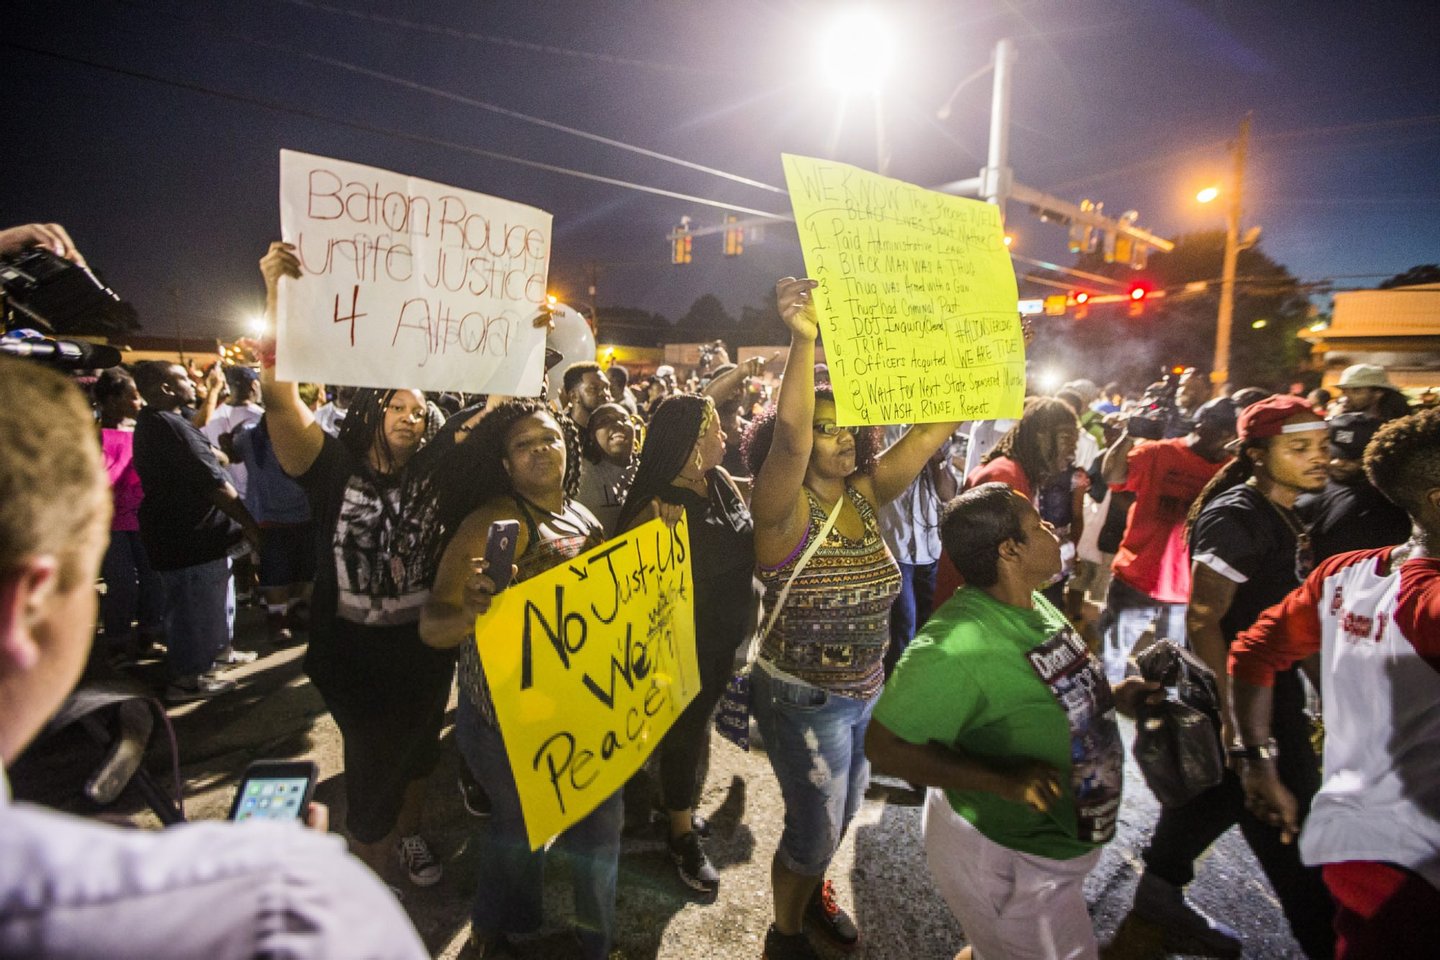 BATON ROUGE, LA -JULY 06: Protesters march to the convenience store where Alton Sterling was shot and killed, July 6, 2016 in Baton Rouge, Louisiana. Sterling was shot by a police officer in front of the Triple S Food Mart in Baton Rouge on Tuesday, July 5, leading the Department of Justice to open a civil rights investigation. (Photo by Mark Wallheiser/Getty Images)